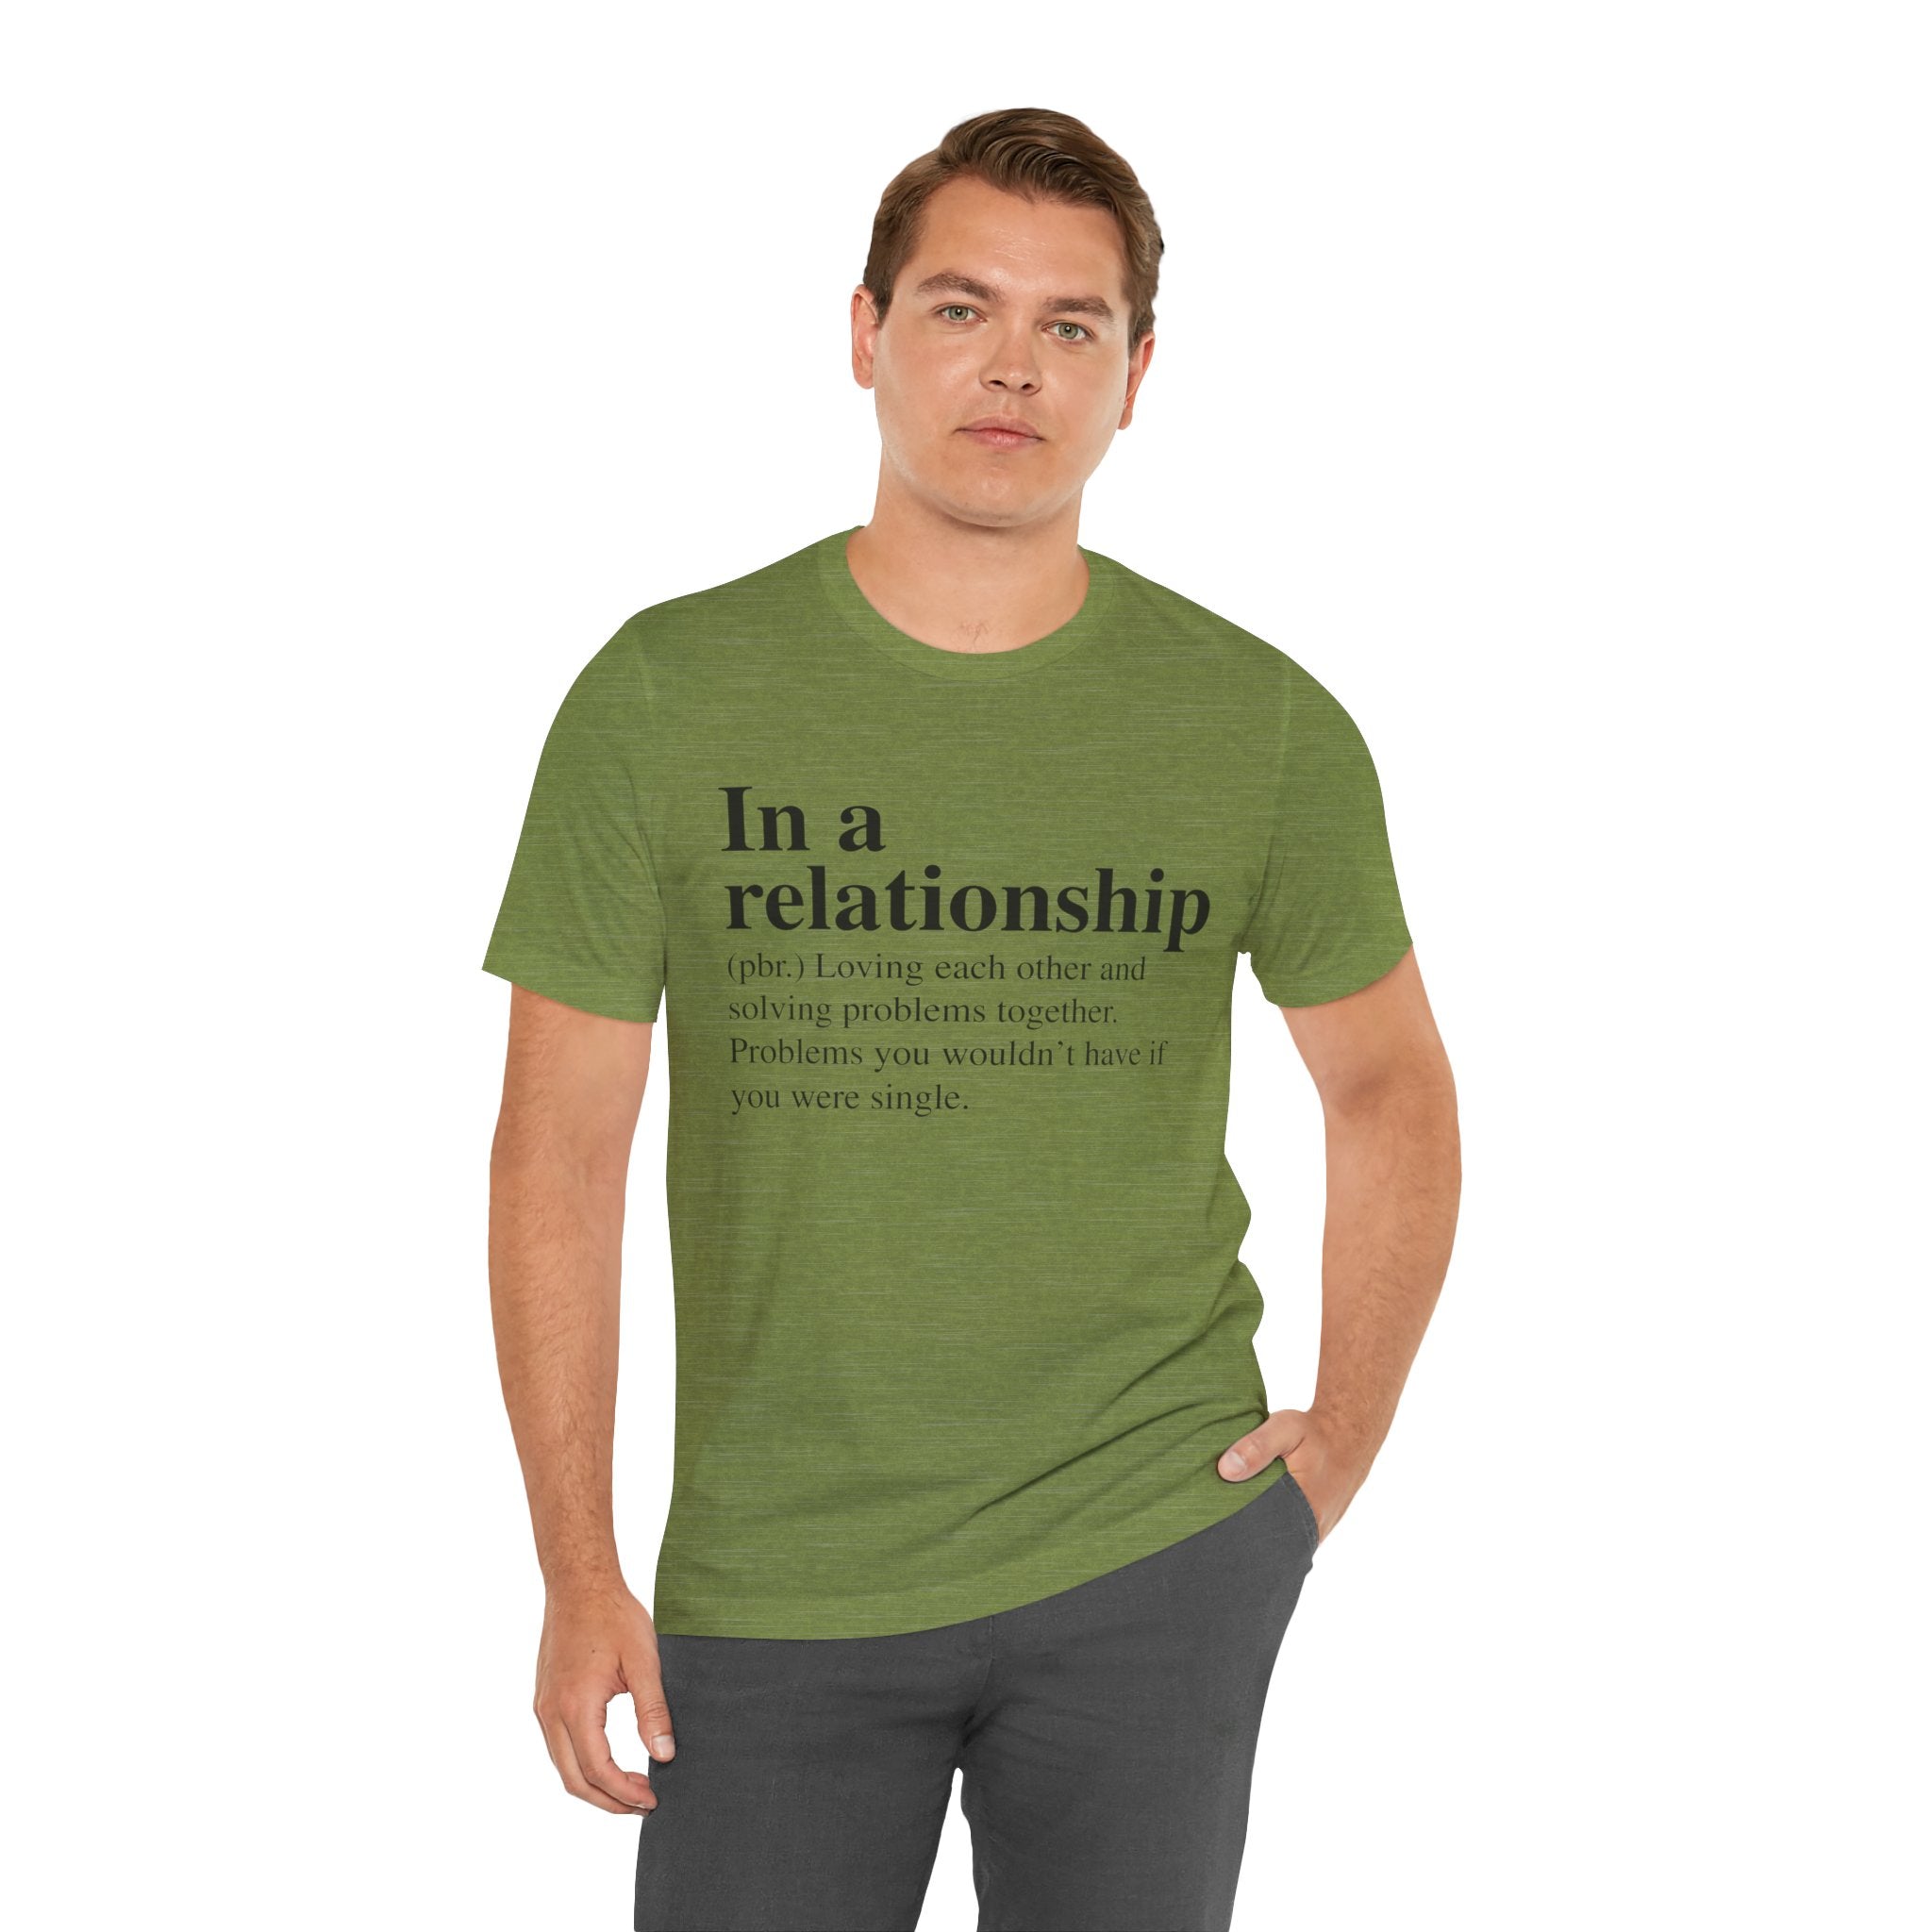 Man in a soft cotton green In a Relationship T-shirt with text reading "solving problems together you wouldn't have if you were single.